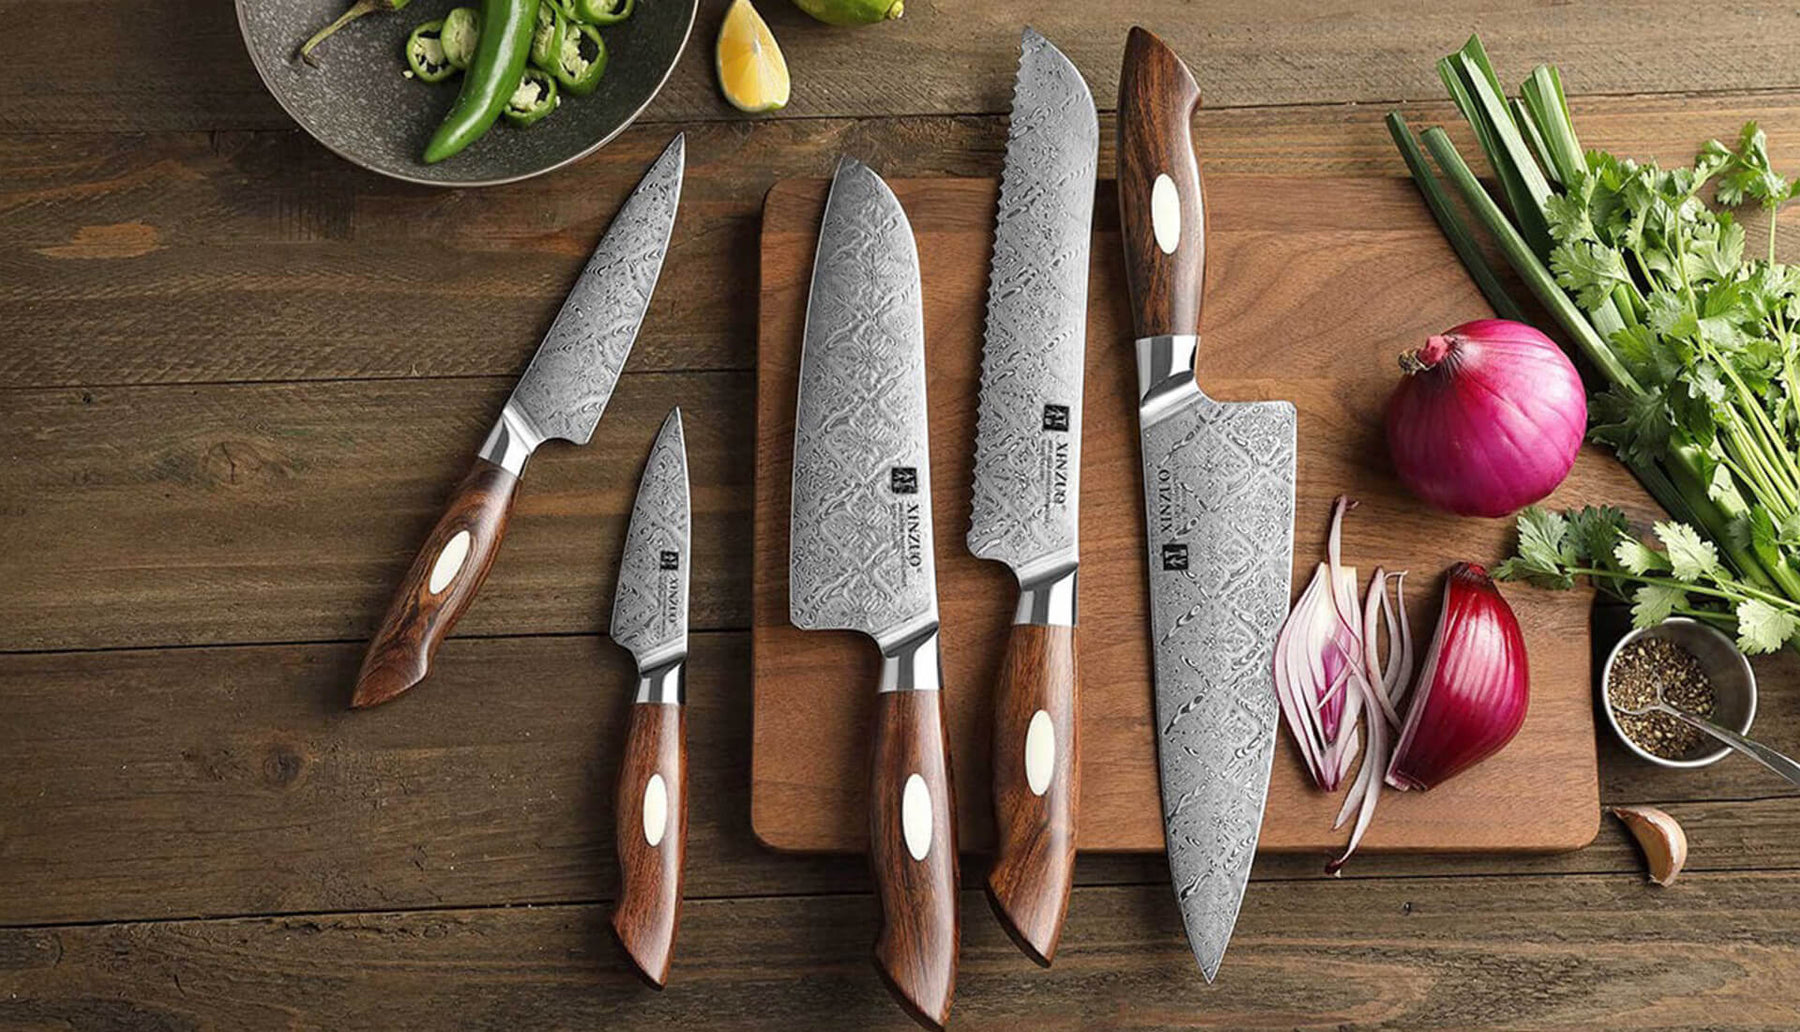 Frequently Asked Questions About Kitchen Knives